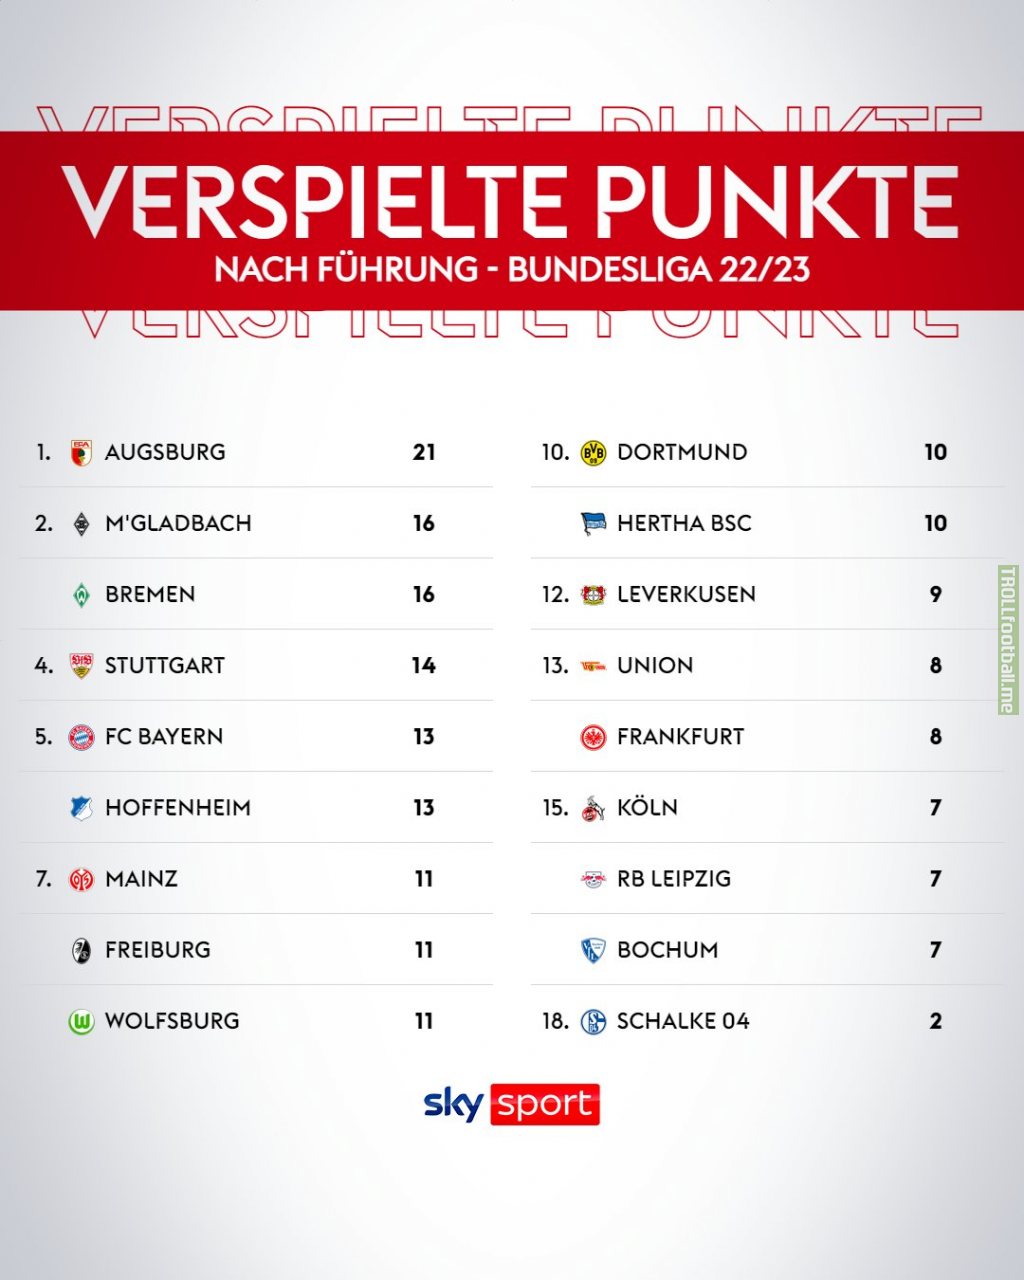 [Sky] Points lost after leading in the Bundesliga 22/23